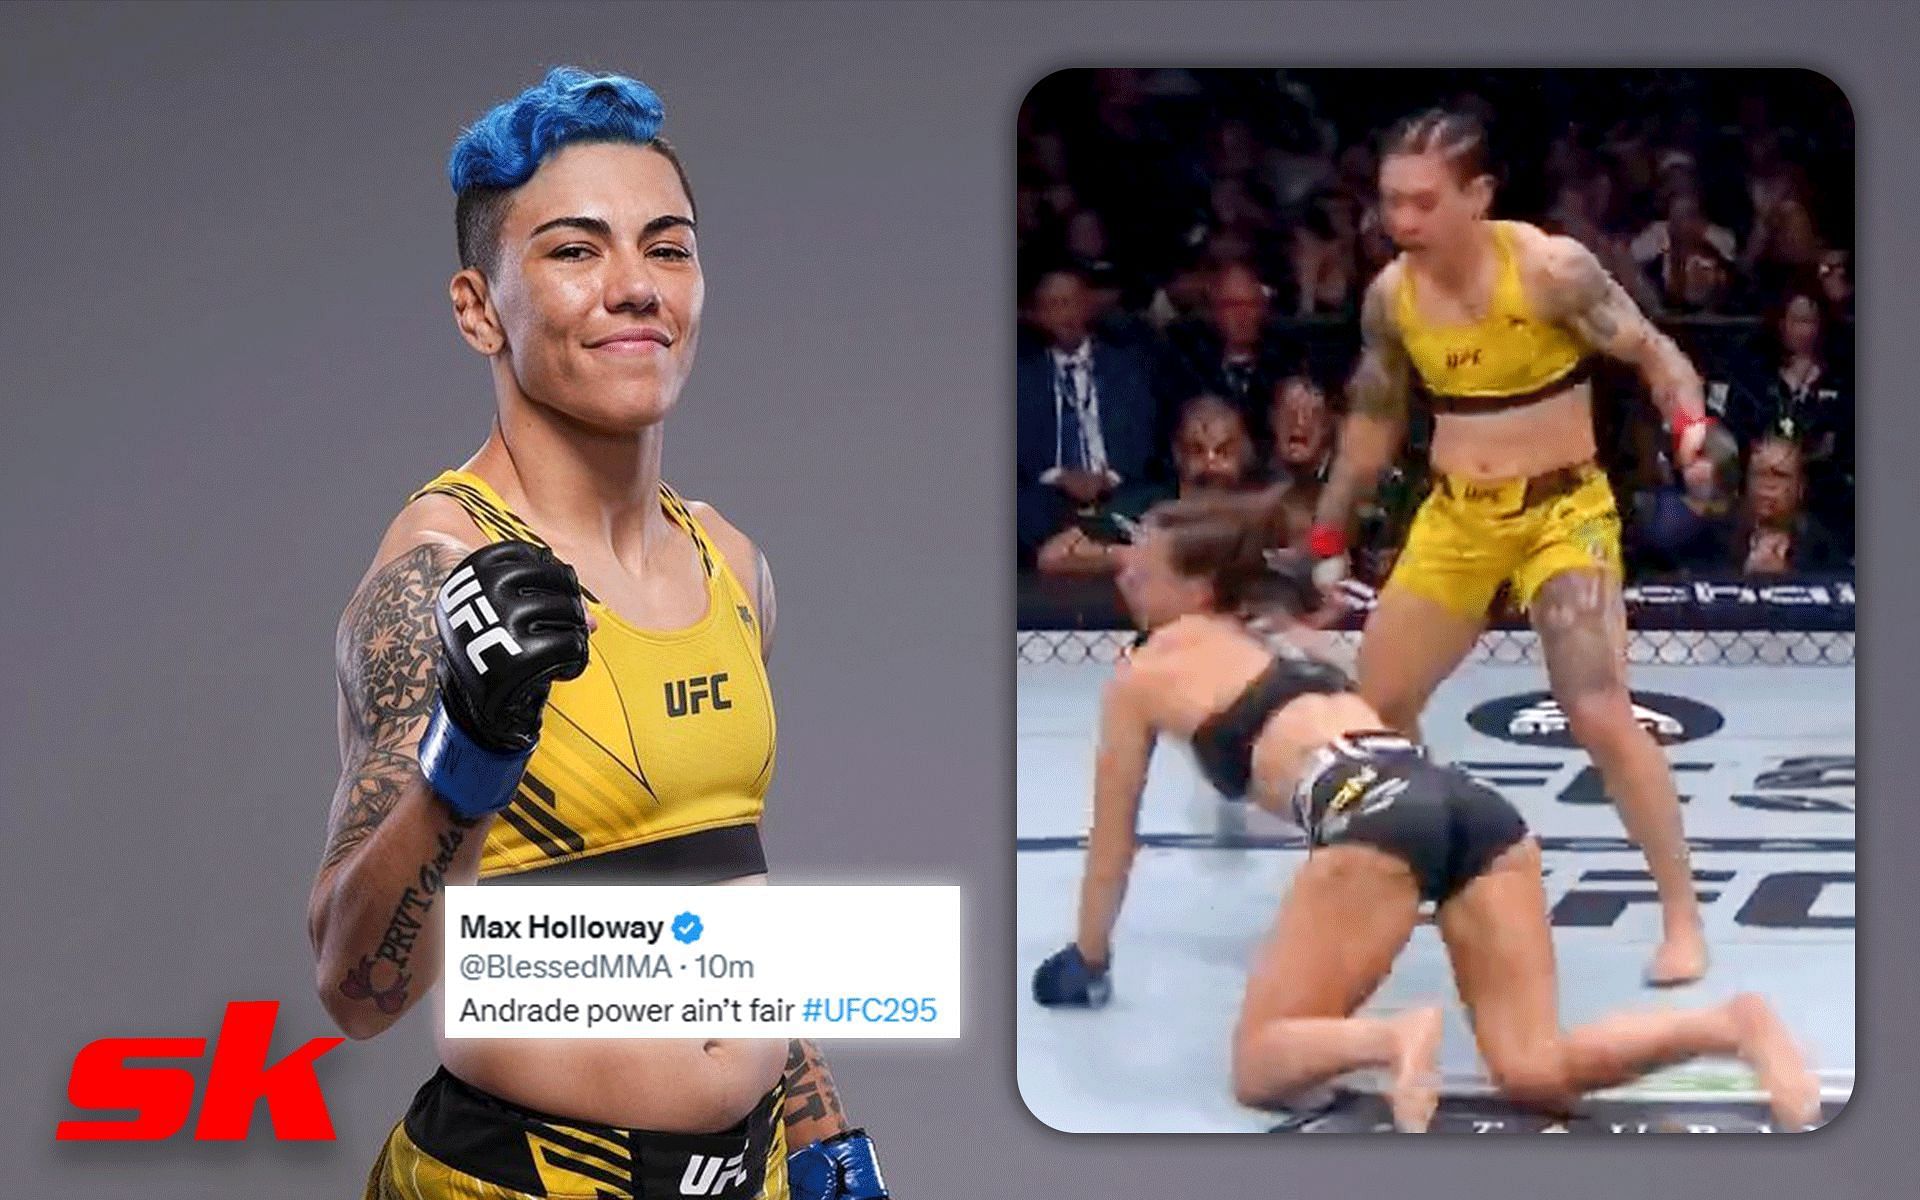 Jessica Andrade emerges victorious at UFC 295 [Image credits: @jessicammapro on Instagram and @GIFSkullX on Twitter]